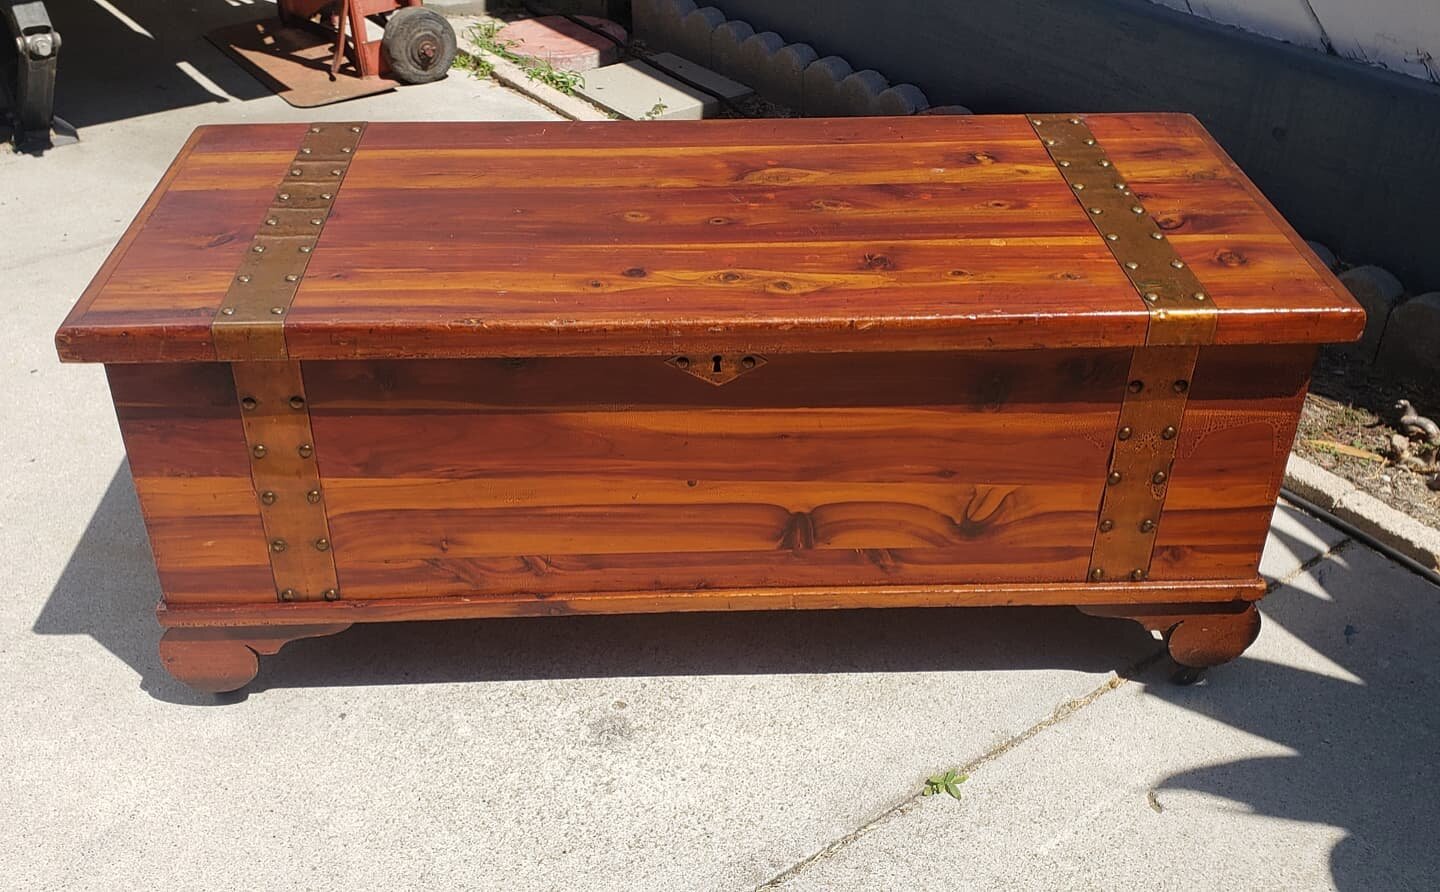 $75. Antique wood cedar chest box cabinet with metal straps and wood casters / wheels. Works great 41&quot; long 17&quot; tall 17&quot; deep. 
Plus tax.
This item is located in my Antique Mall booth in the city or Orange. Text Message (don't call) fo